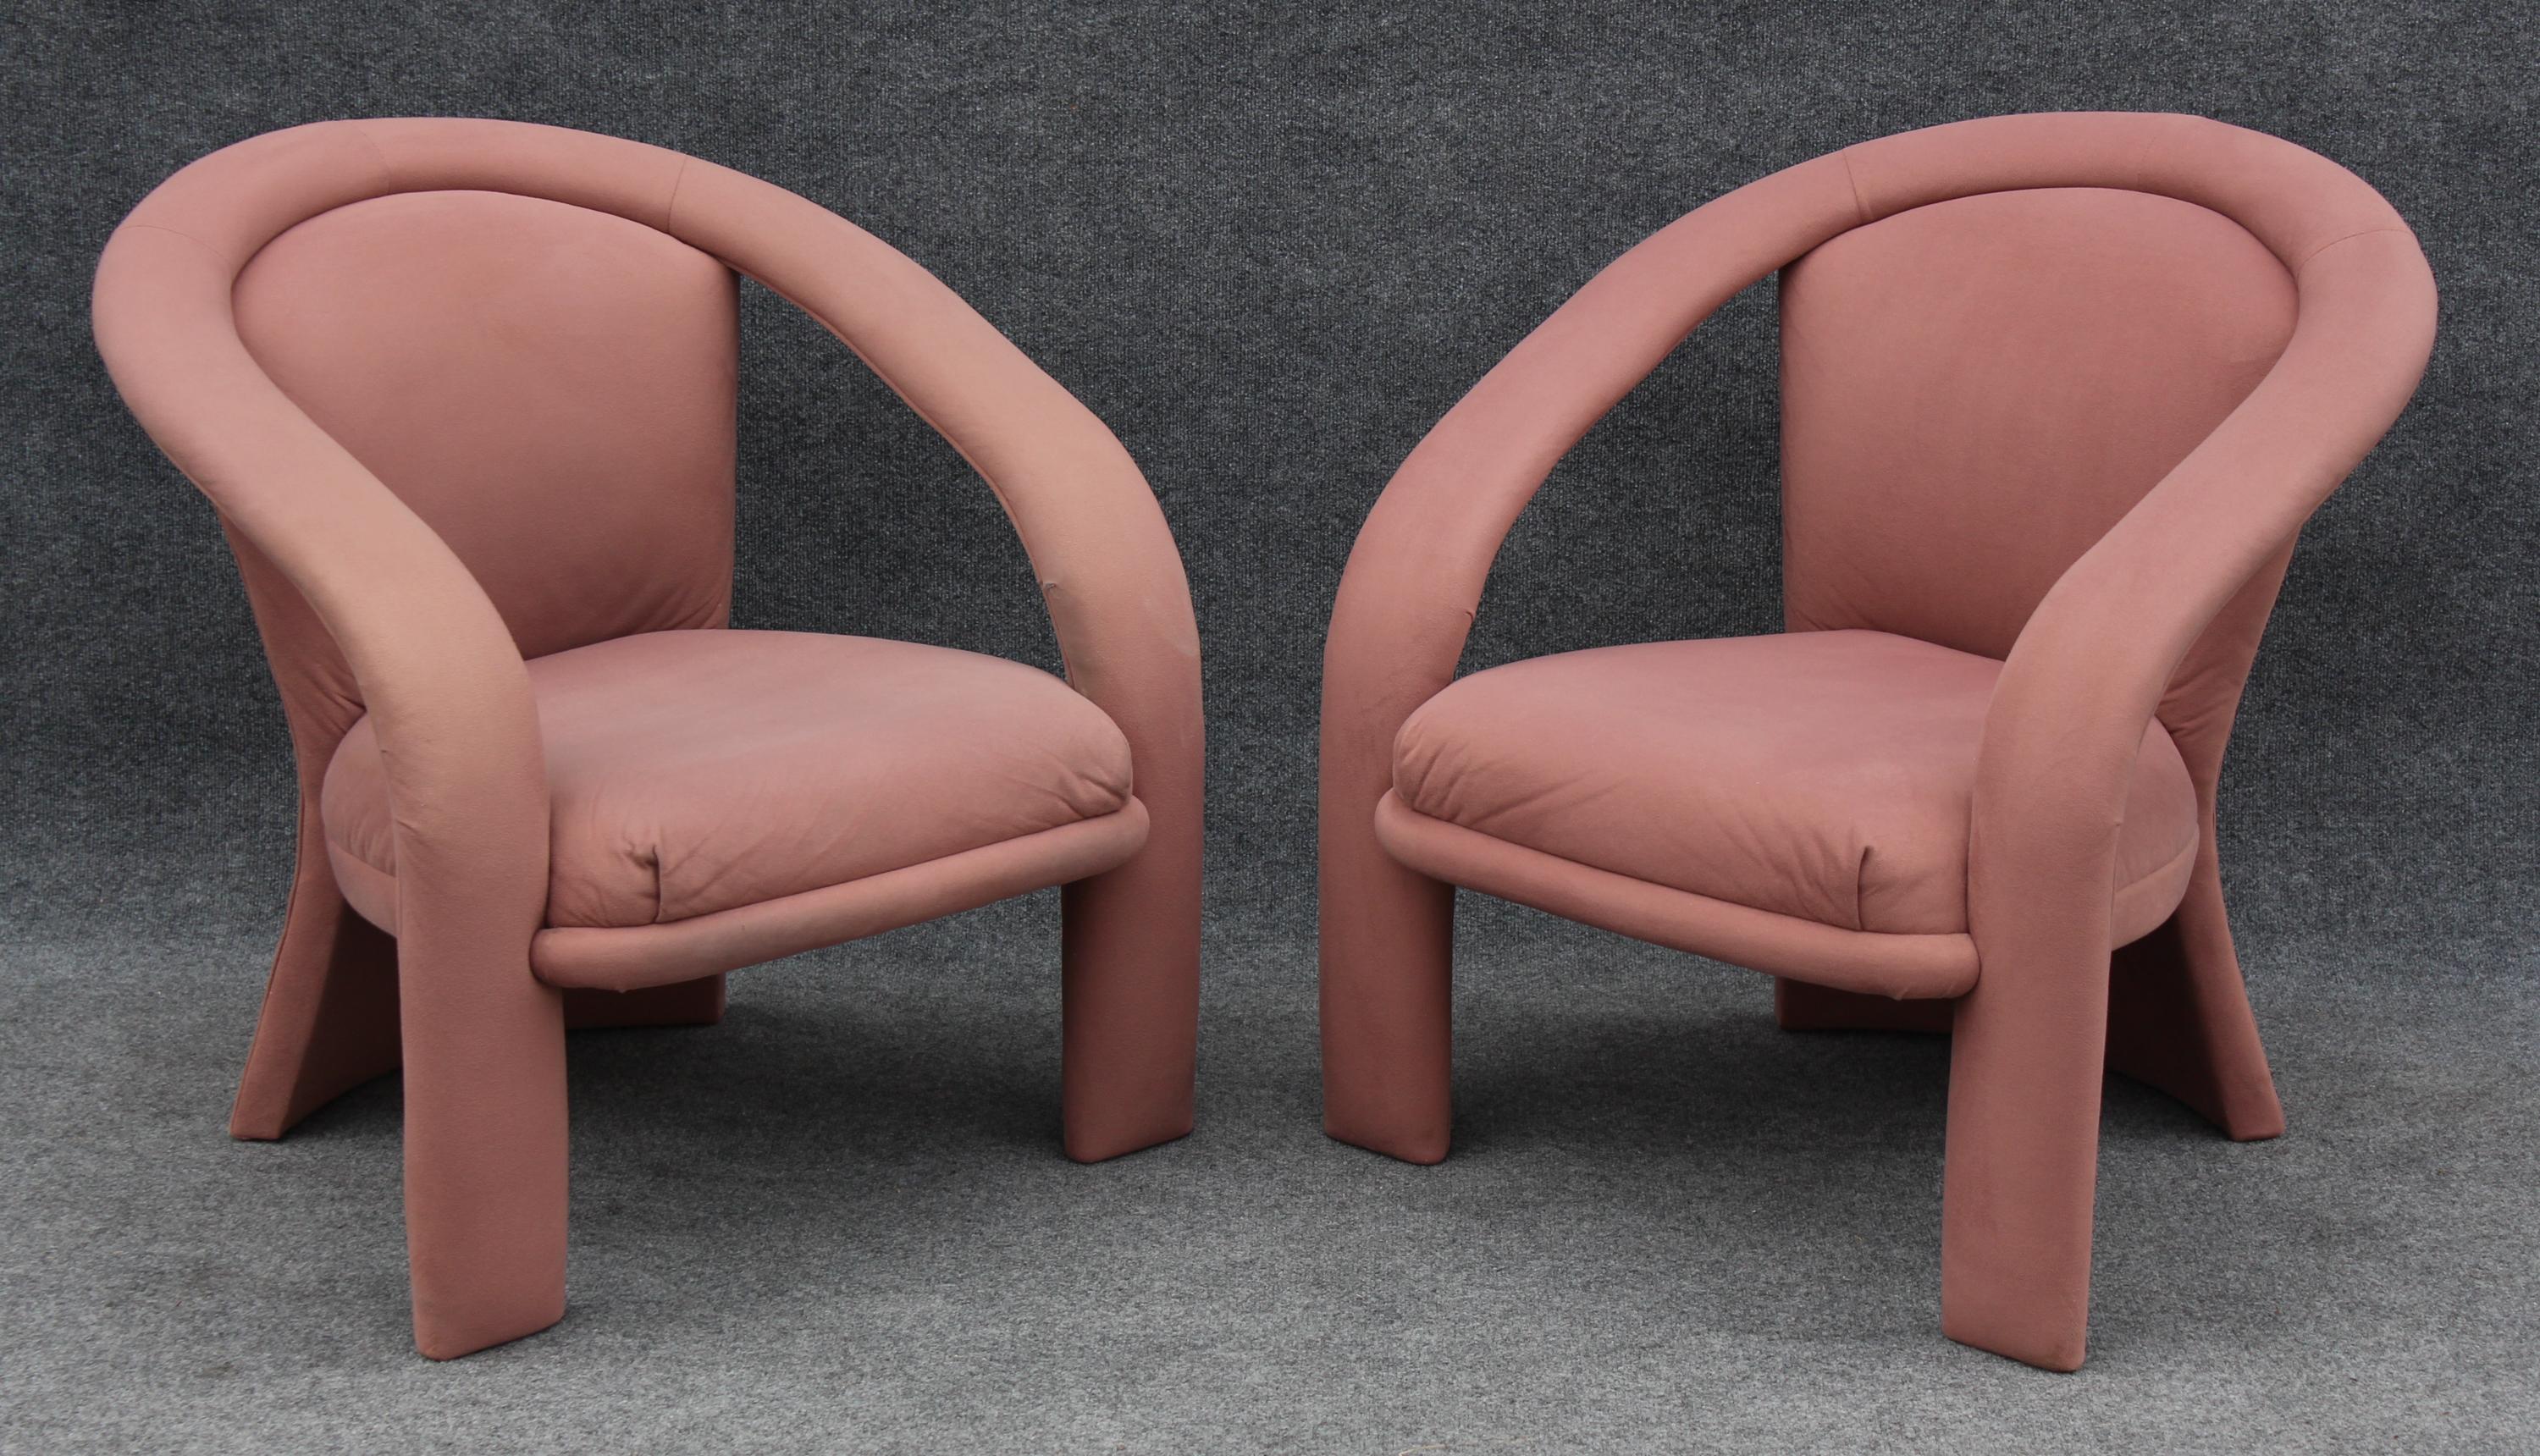 Pair of Pink Suede Sculptural Ribbon Armchairs or Lounge Chairs by Marge Carson For Sale 2